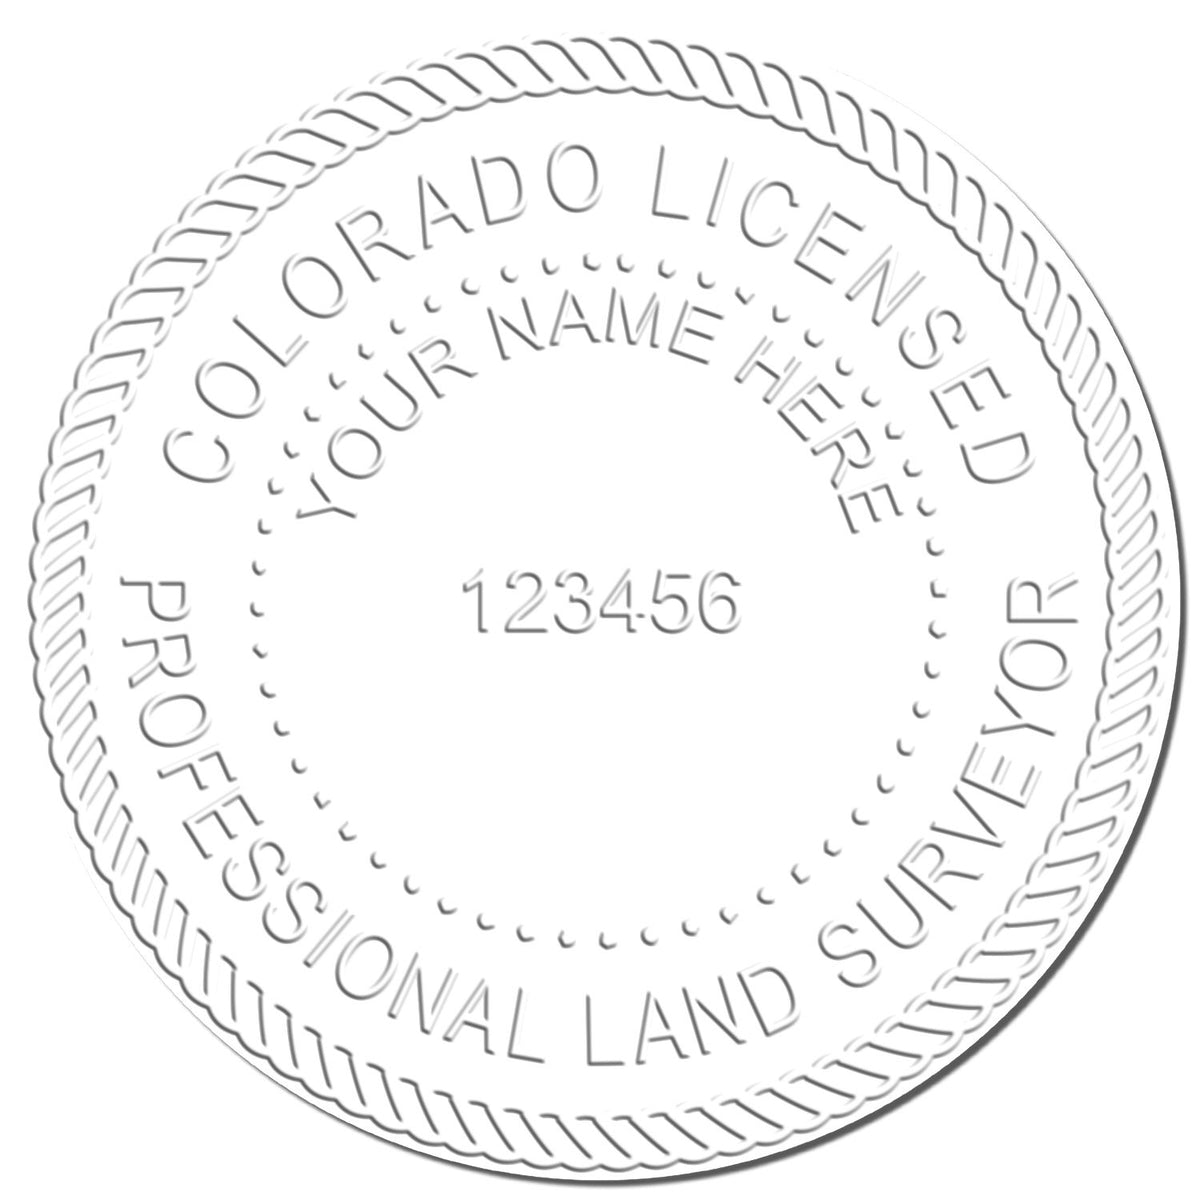 This paper is stamped with a sample imprint of the Long Reach Colorado Land Surveyor Seal, signifying its quality and reliability.